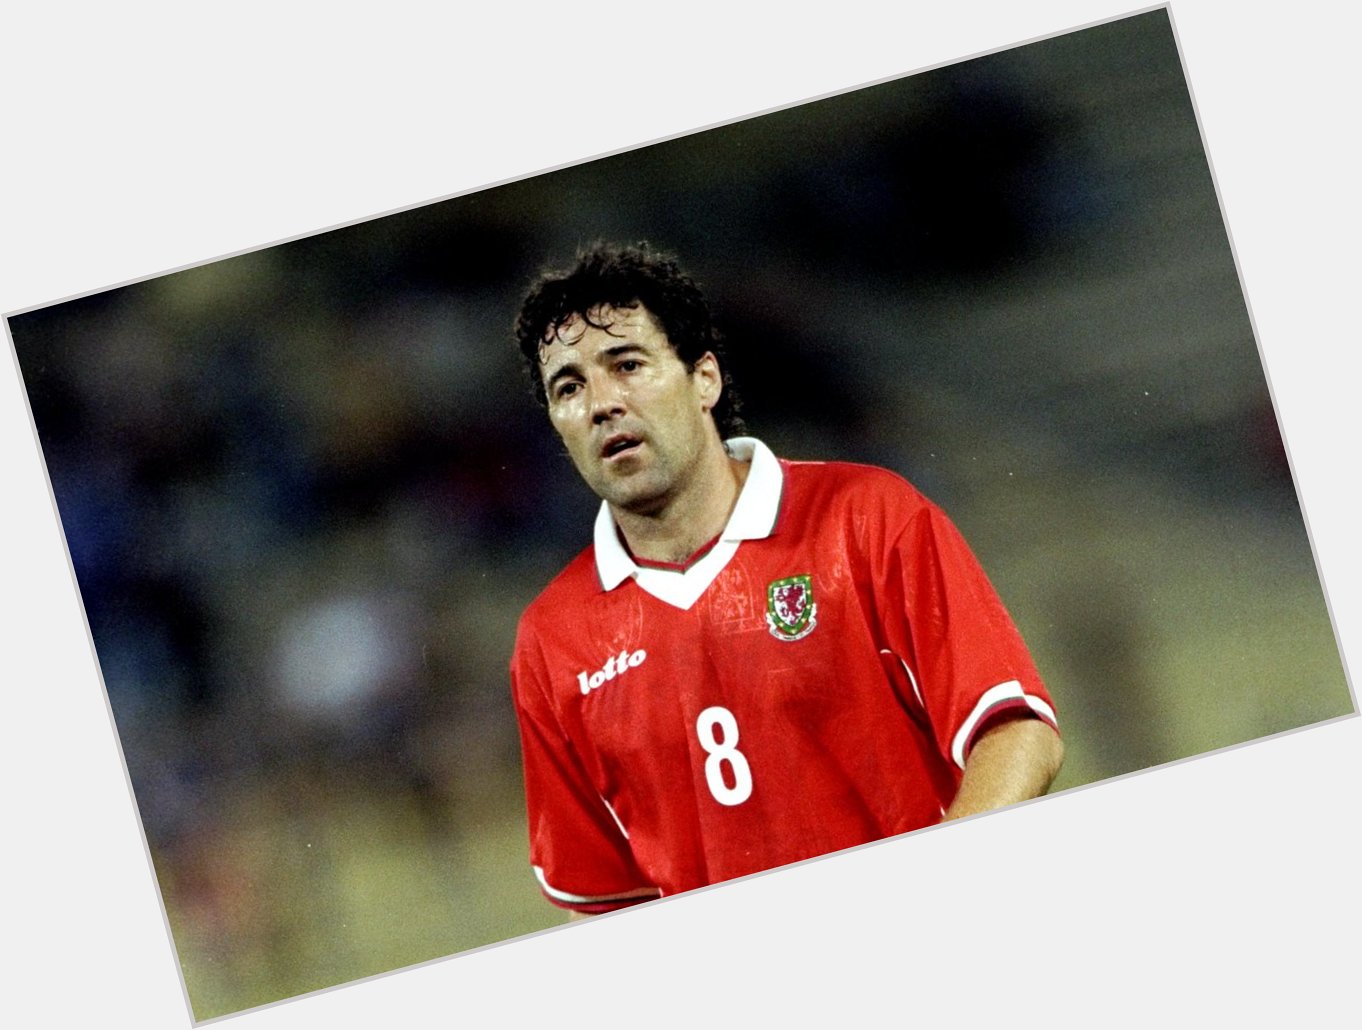 Happy birthday to legend Dean Saunders, who turns 53 today! 